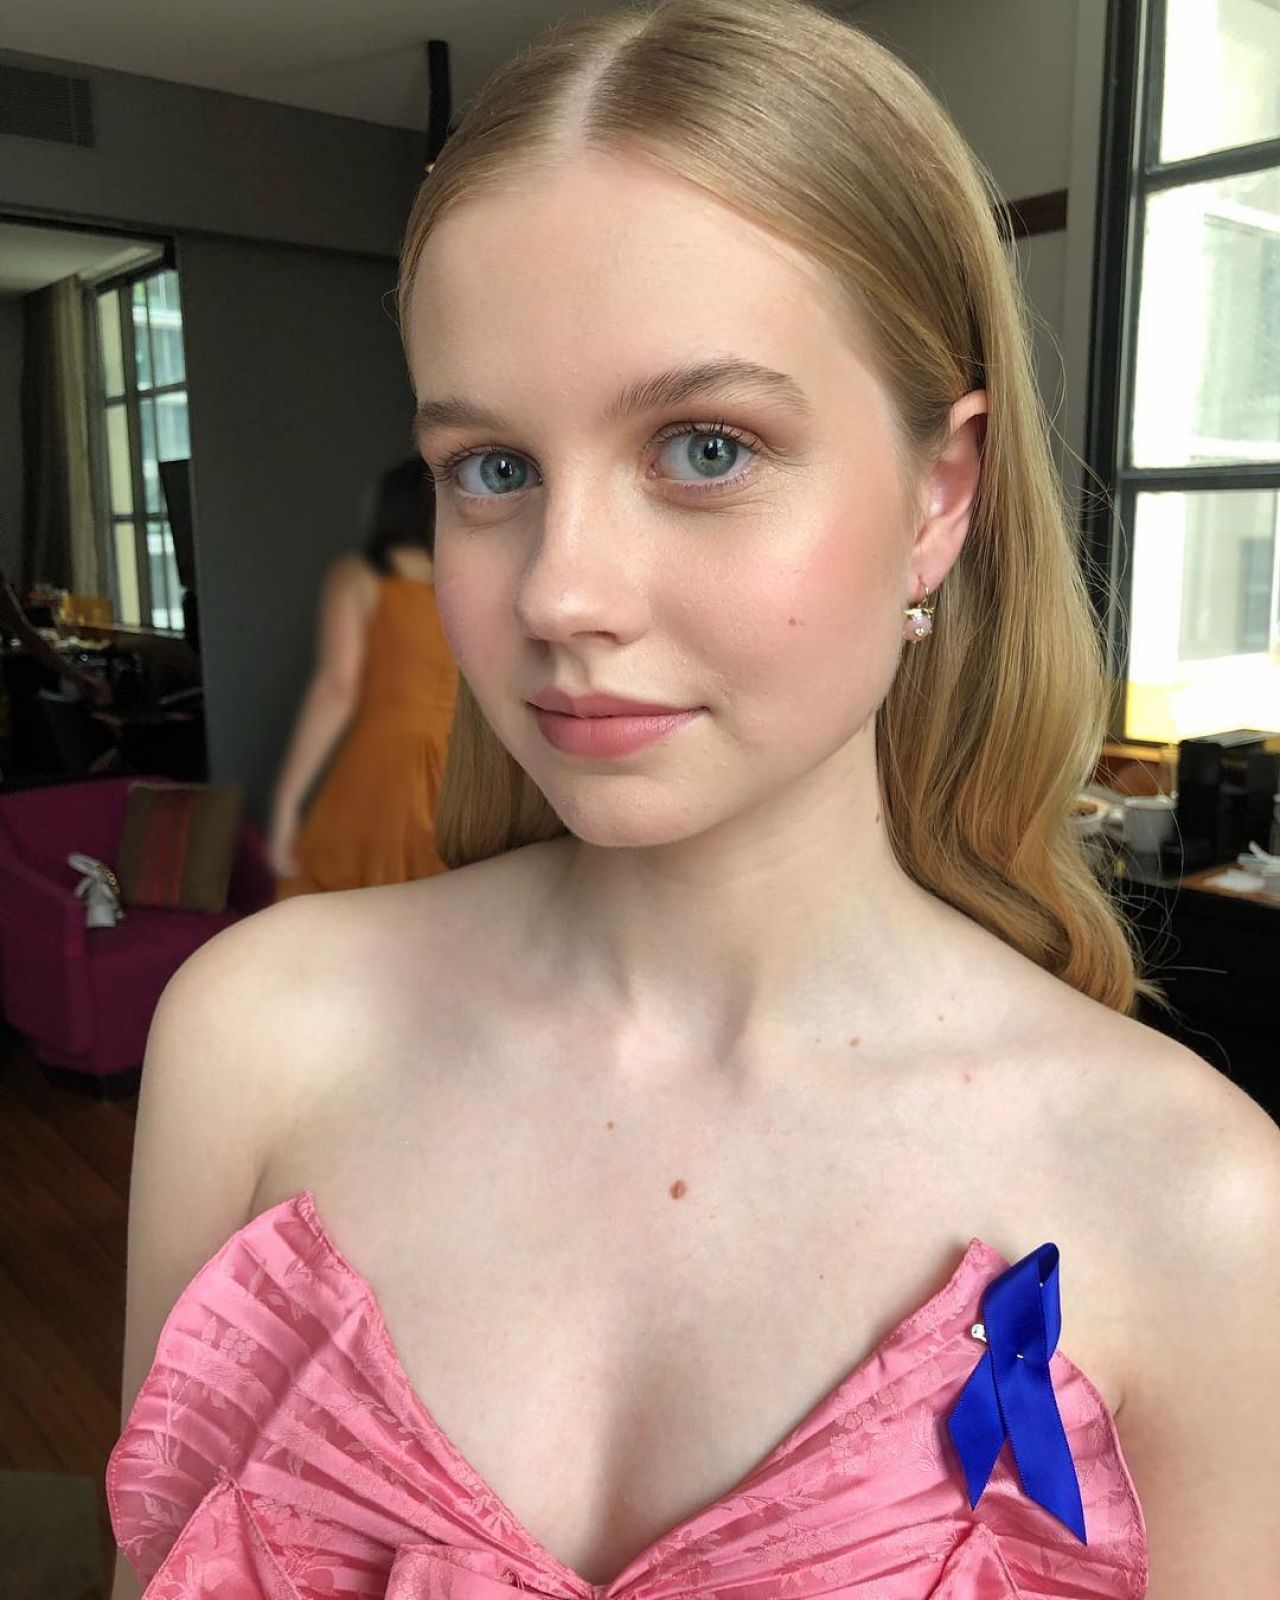 Angourie Rice - Personal Pics 12/06/2018.